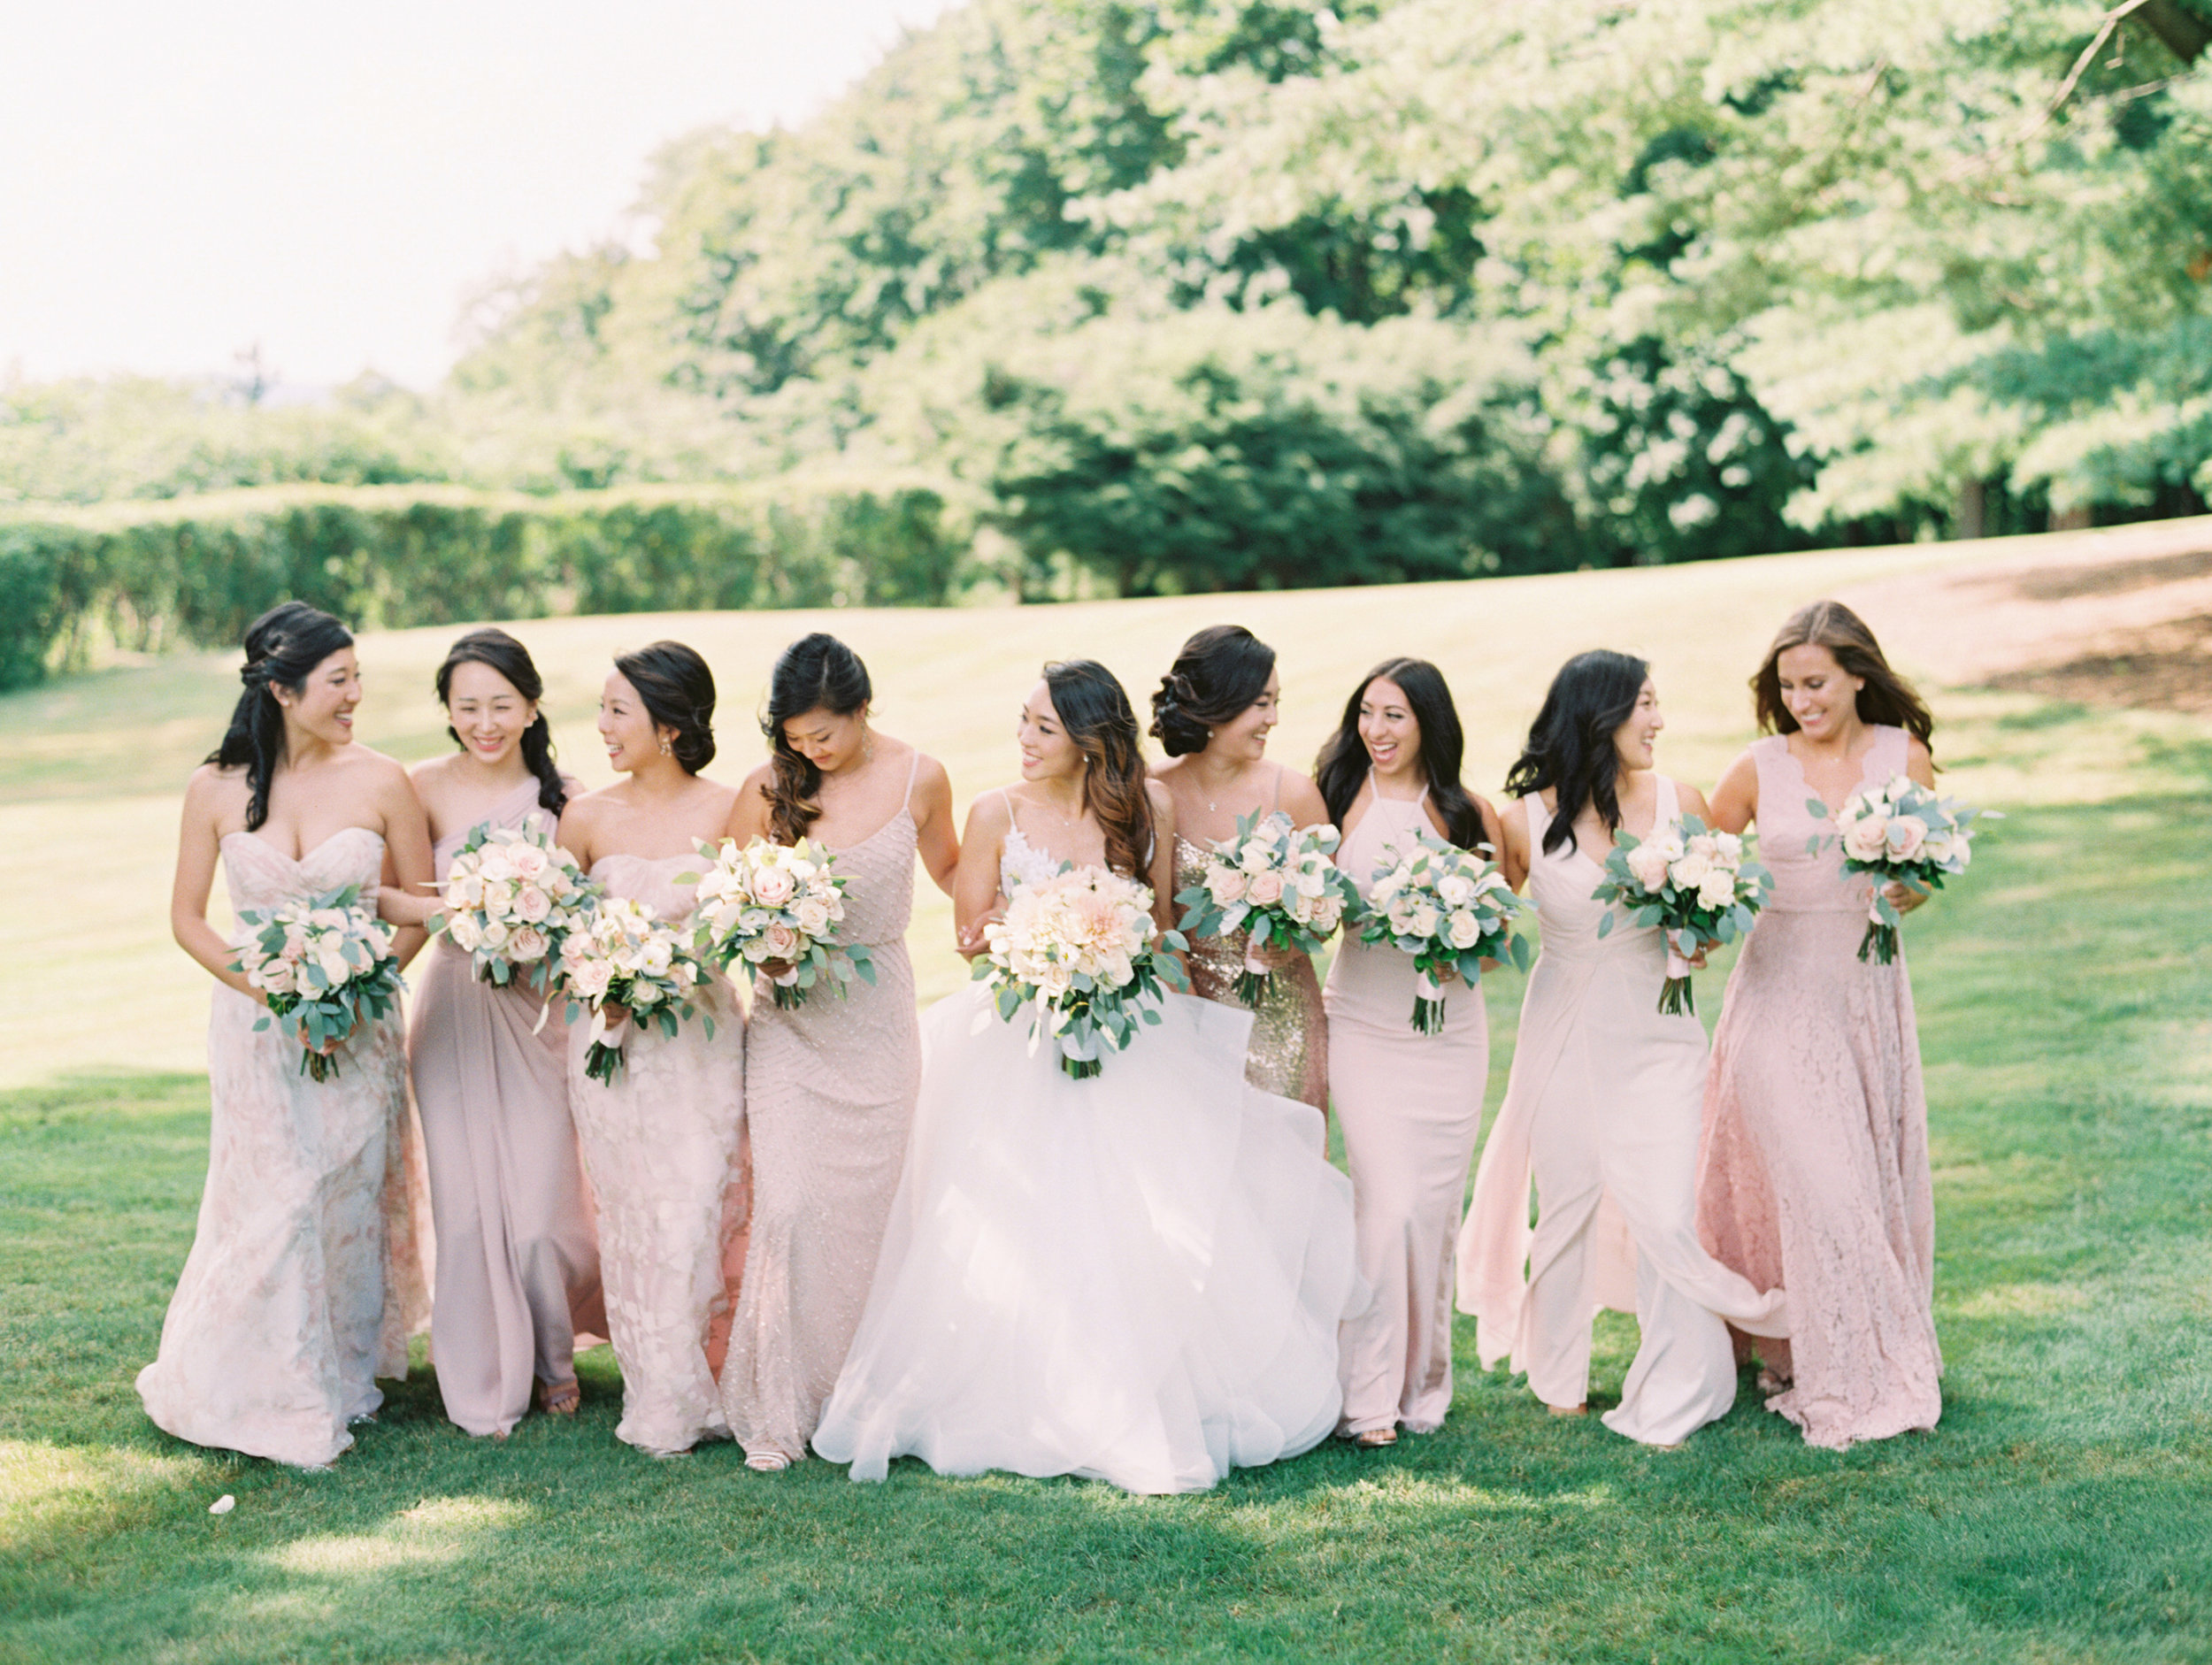 Mismatched Bridesmaids' Dresses: Tips and Advice